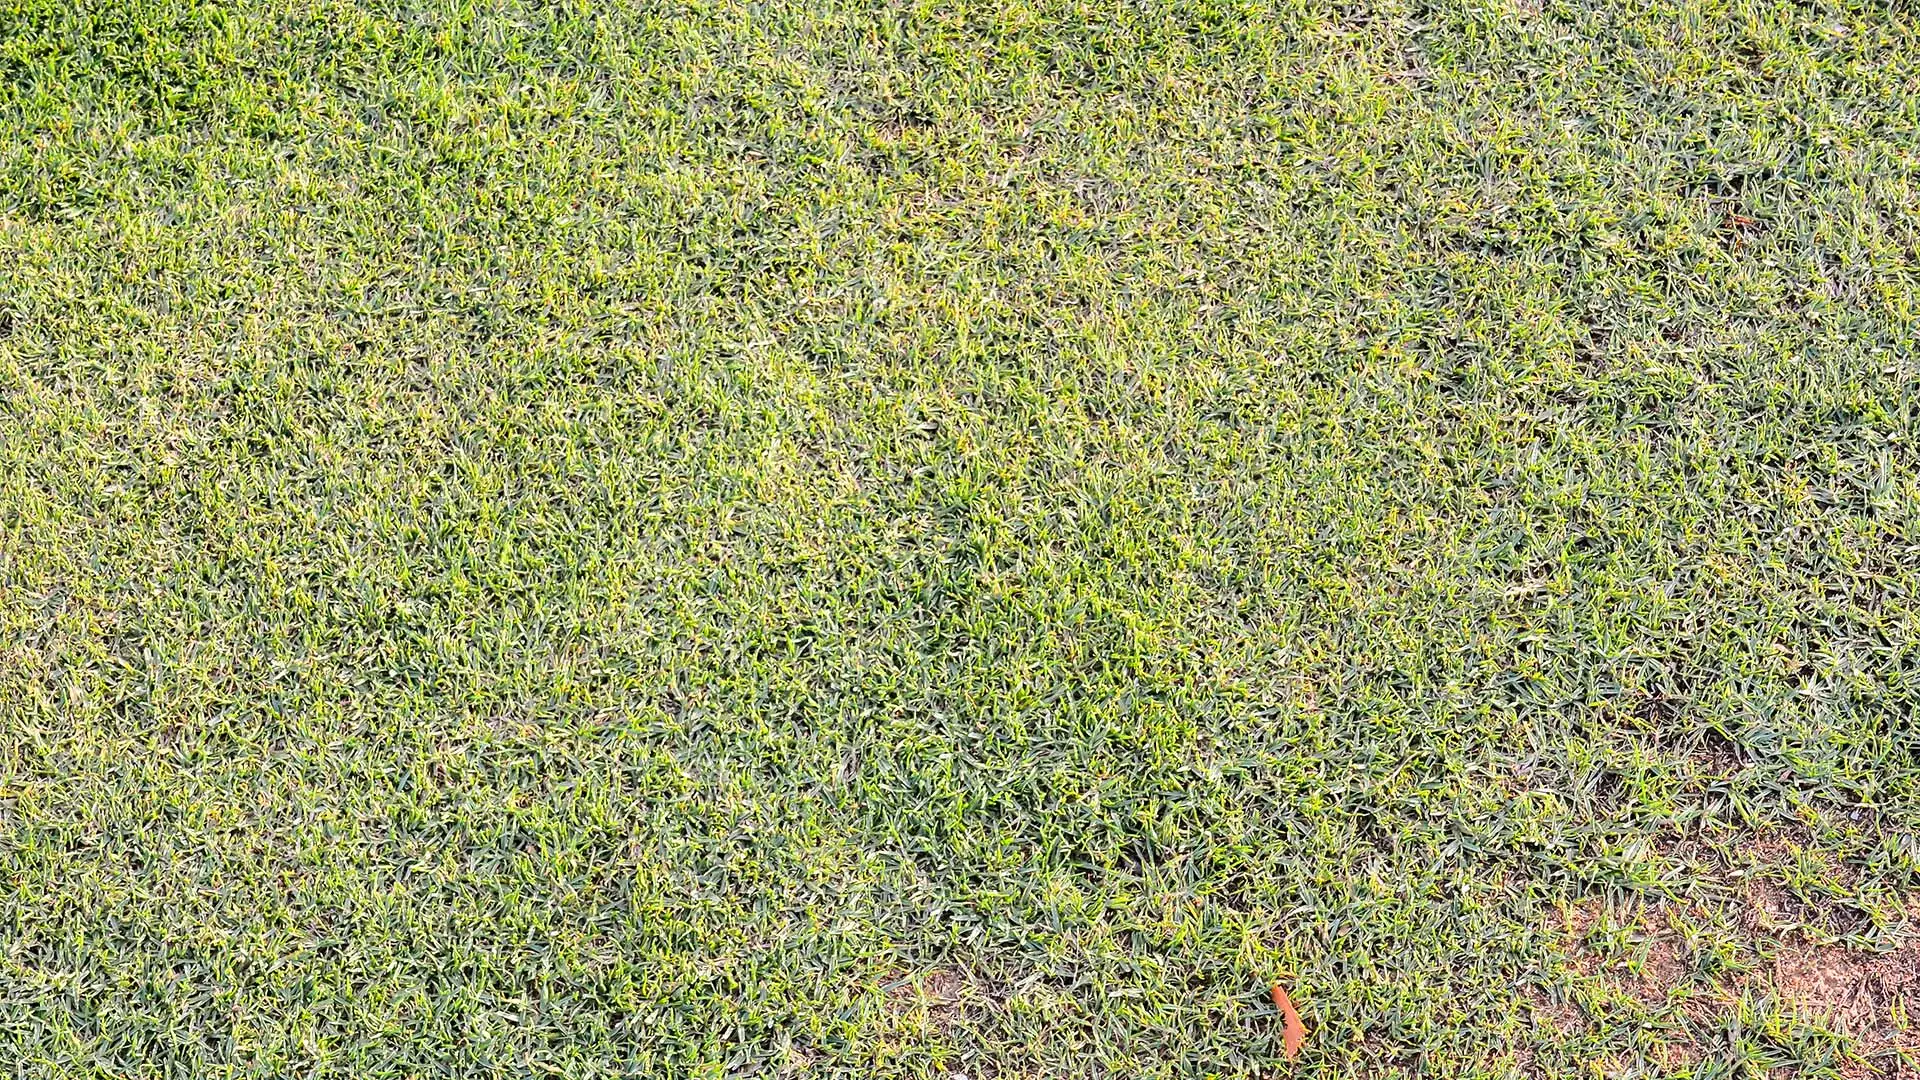 A lawn suffering from grey leaf spot and in need of treatment in Allen, TX.